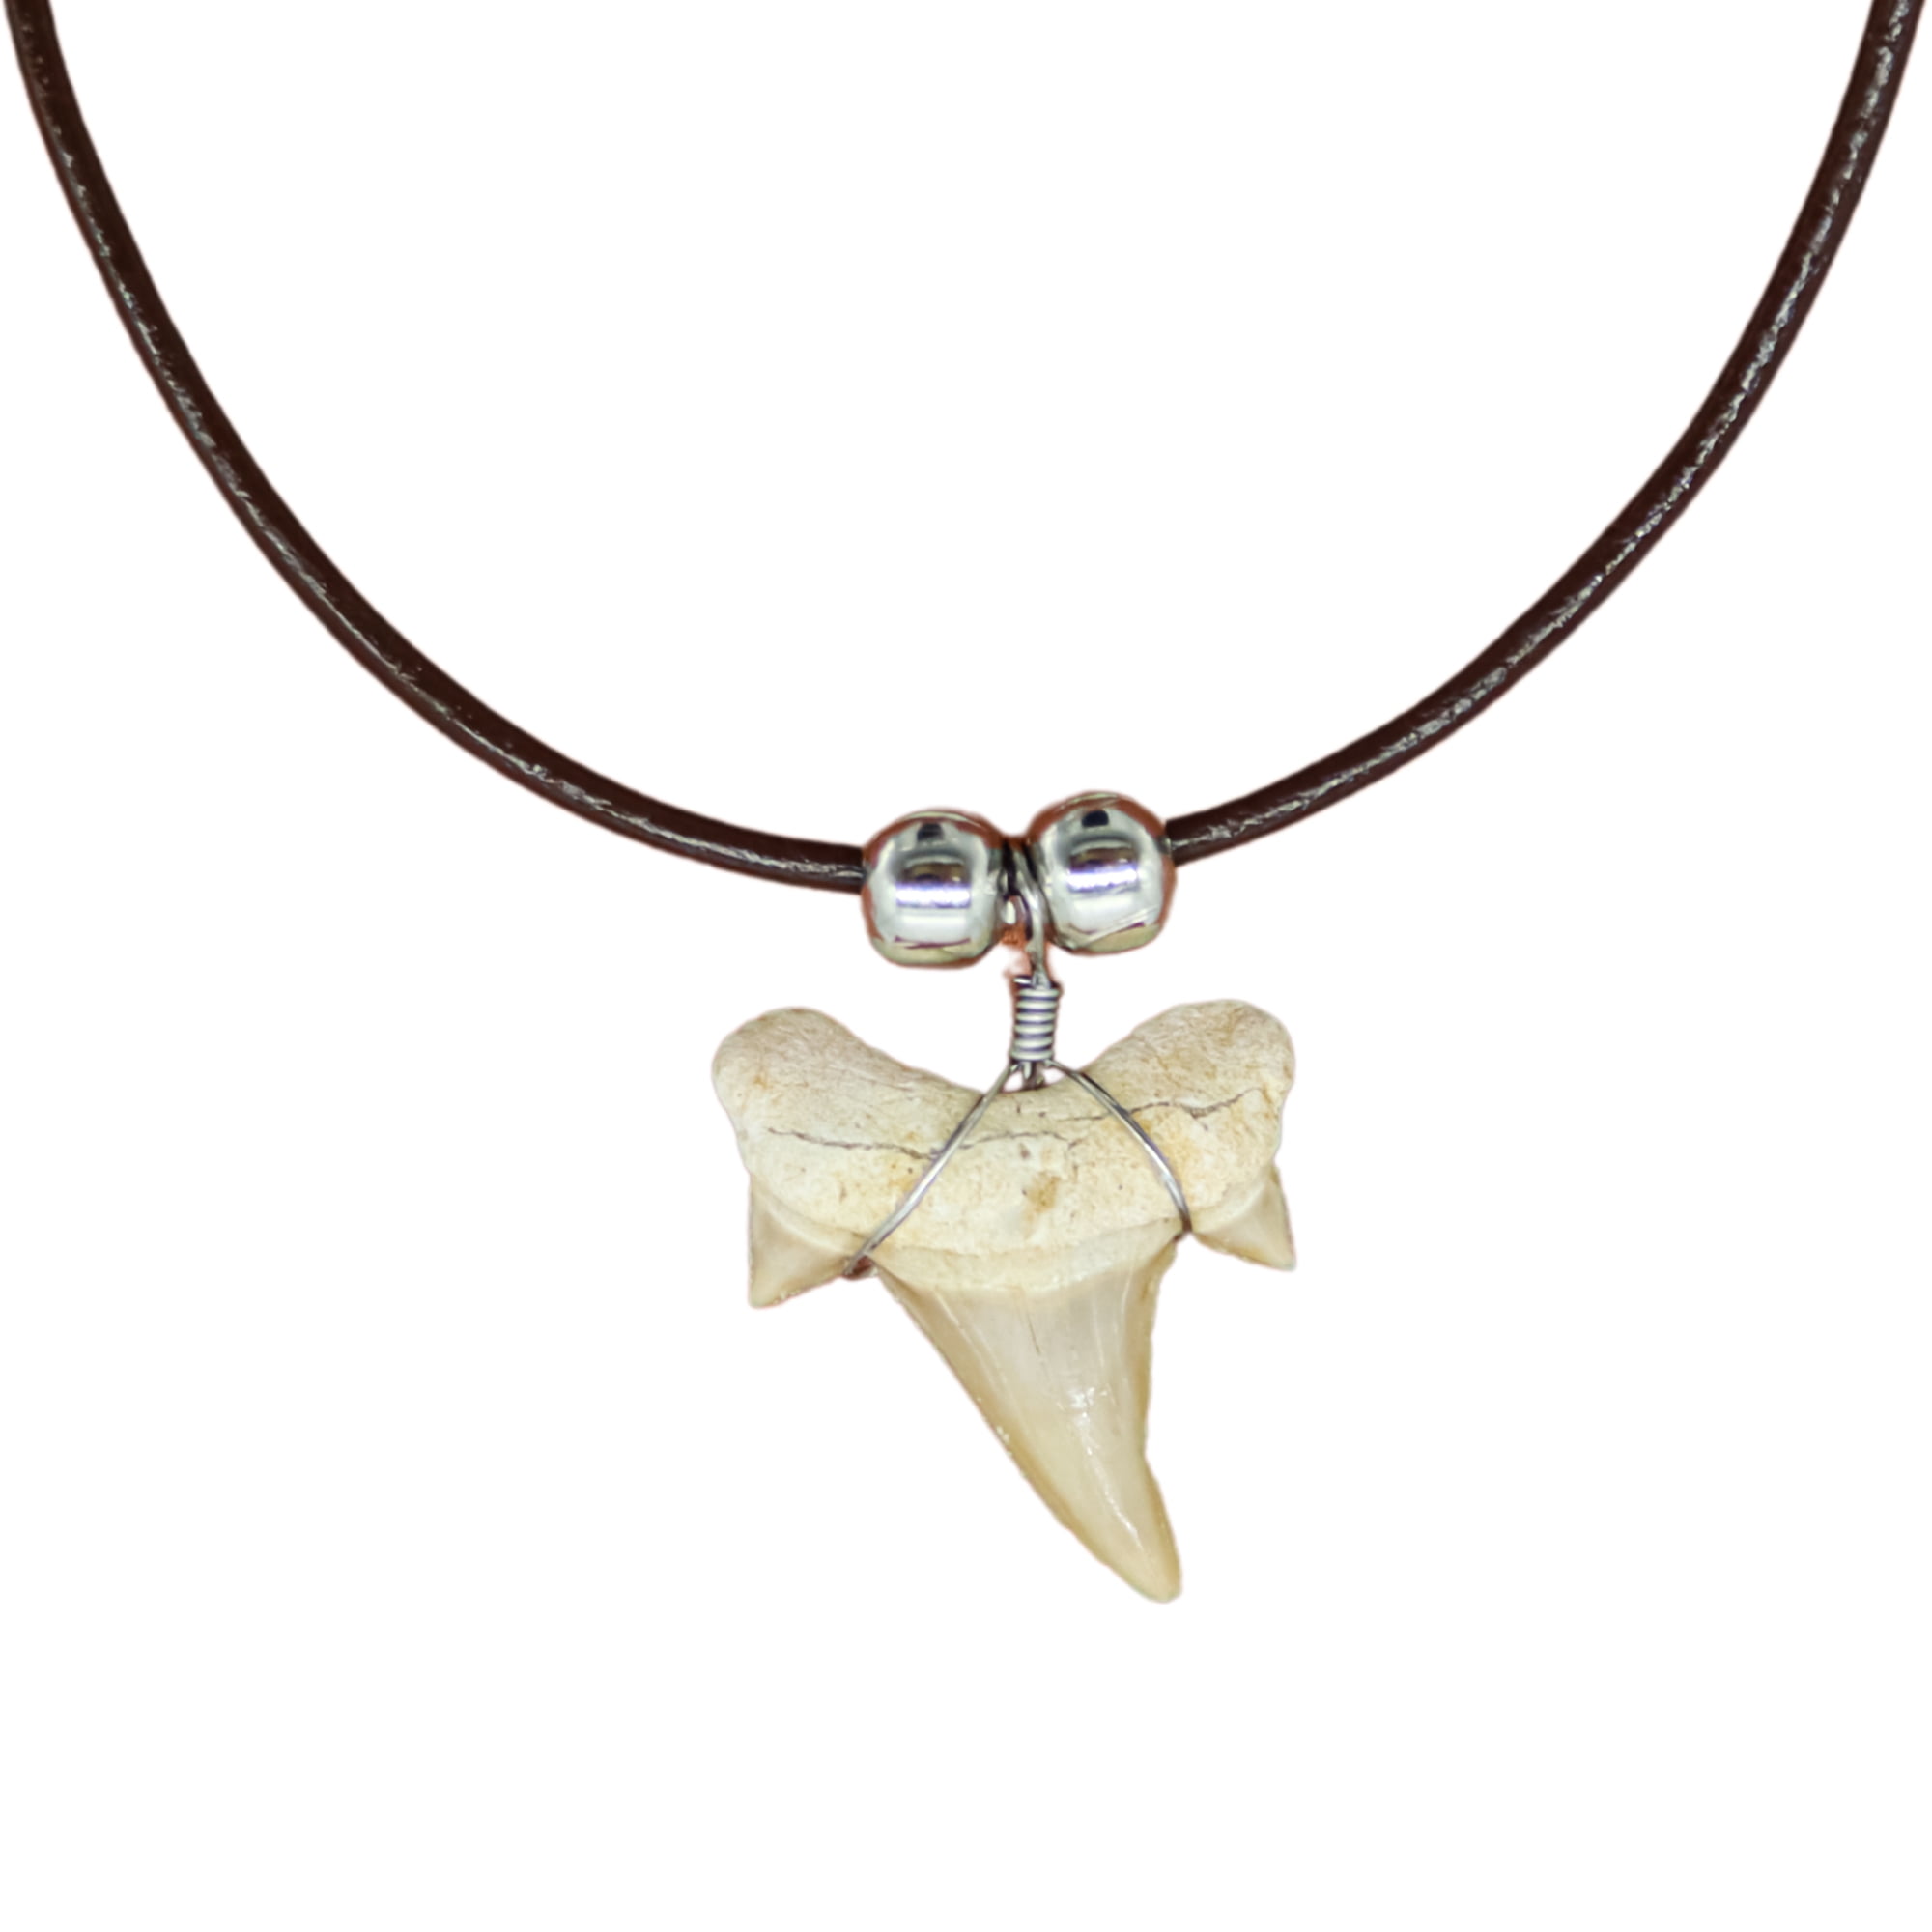 FROG SAC Natural Shark Tooth Necklace for Boys, Genuine Fossil Shark Teeth  Jewelry for Men, Cool Beach Necklaces for Teen Girls, Beachy Surfer Necklace  for Women 